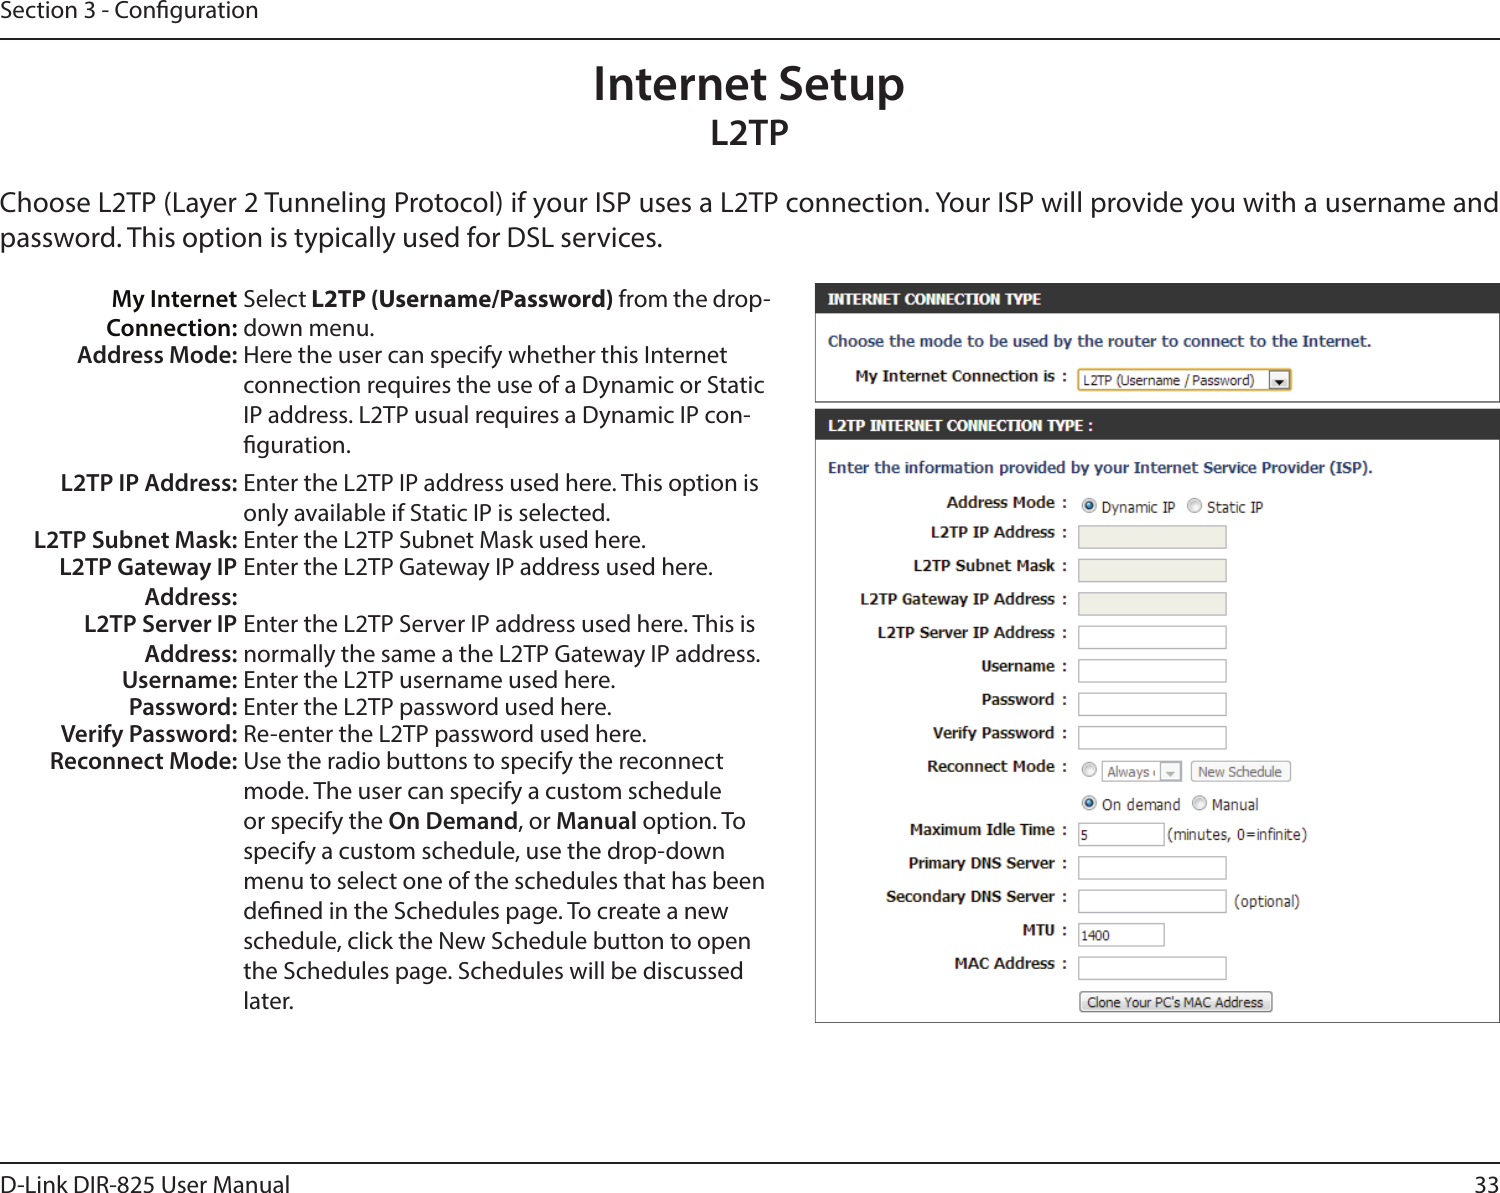 33D-Link DIR-825 User ManualSection 3 - CongurationInternet SetupL2TPChoose L2TP (Layer 2 Tunneling Protocol) if your ISP uses a L2TP connection. Your ISP will provide you with a username and password. This option is typically used for DSL services. My Internet Connection:Select L2TP (Username/Password) from the drop-down menu.Address Mode: Here the user can specify whether this Internet connection requires the use of a Dynamic or Static IP address. L2TP usual requires a Dynamic IP con-guration.L2TP IP Address: Enter the L2TP IP address used here. This option is only available if Static IP is selected.L2TP Subnet Mask: Enter the L2TP Subnet Mask used here.L2TP Gateway IP Address:Enter the L2TP Gateway IP address used here.L2TP Server IP Address:Enter the L2TP Server IP address used here. This is normally the same a the L2TP Gateway IP address.Username: Enter the L2TP username used here.Password: Enter the L2TP password used here.Verify Password: Re-enter the L2TP password used here.Reconnect Mode: Use the radio buttons to specify the reconnect mode. The user can specify a custom schedule or specify the On Demand, or Manual option. To specify a custom schedule, use the drop-down menu to select one of the schedules that has been dened in the Schedules page. To create a new schedule, click the New Schedule button to open the Schedules page. Schedules will be discussed later.